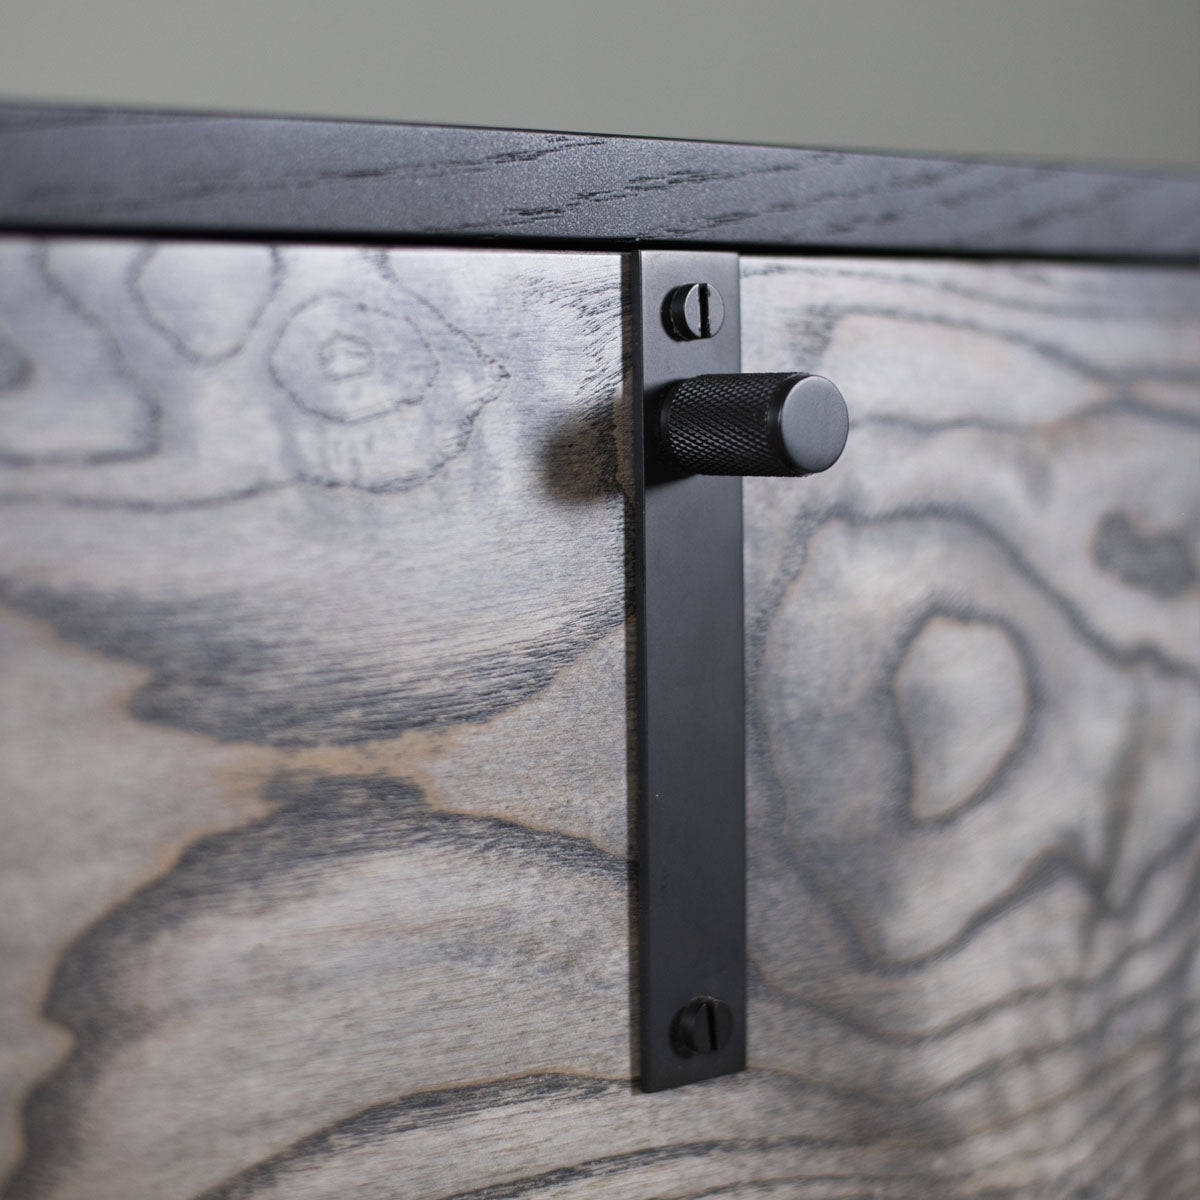 An image of the Oak Sideboard, Oli product available from Koda Studios